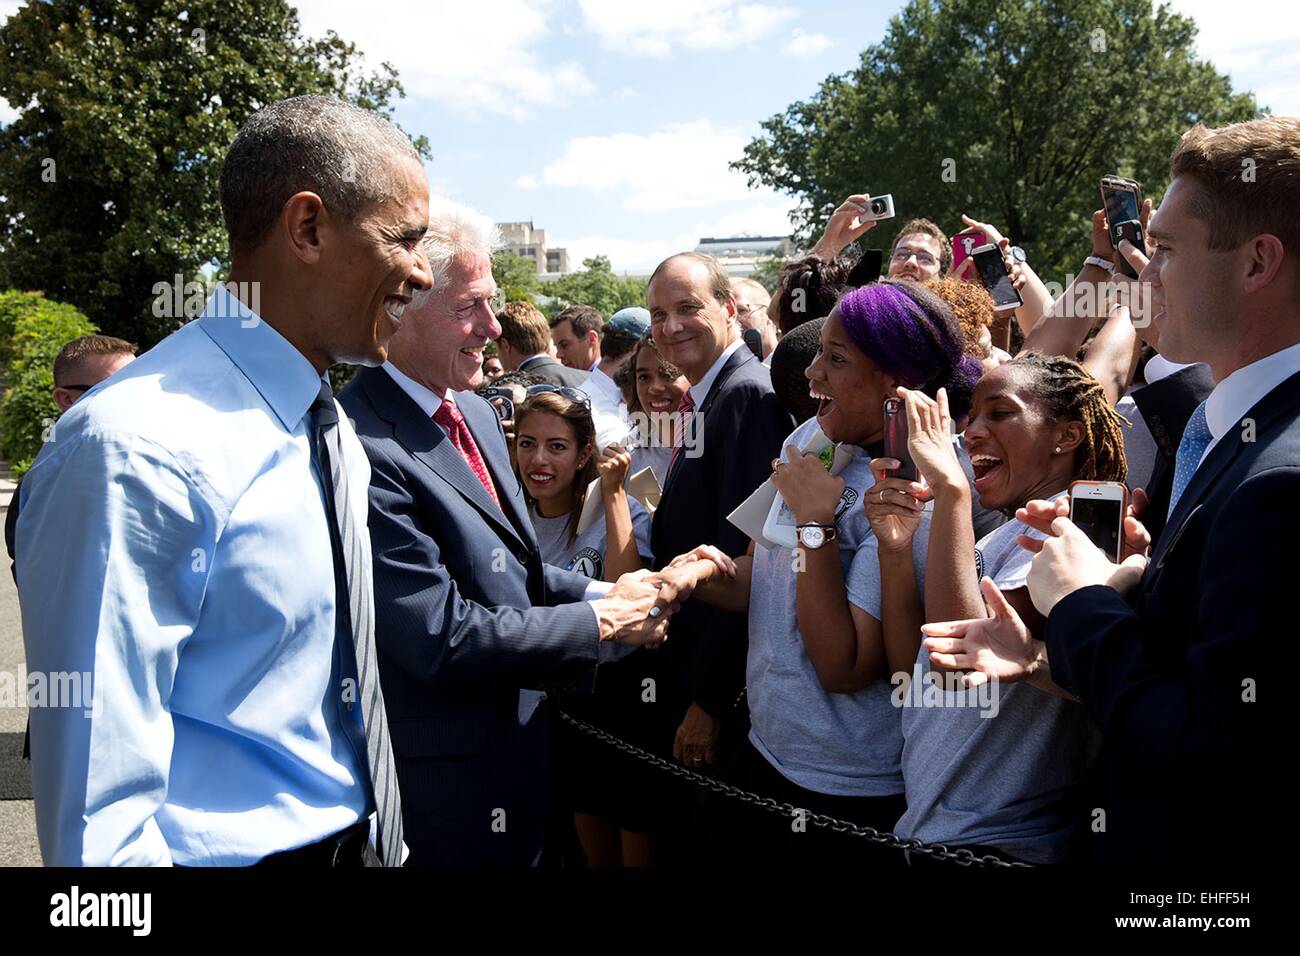 US President Barack Obama and former President Bill Clinton greet supporters during the 20th anniversary of the AmeriCorps national service program on the South Lawn of the White House September 12, 2014 in Washington, DC Stock Photo